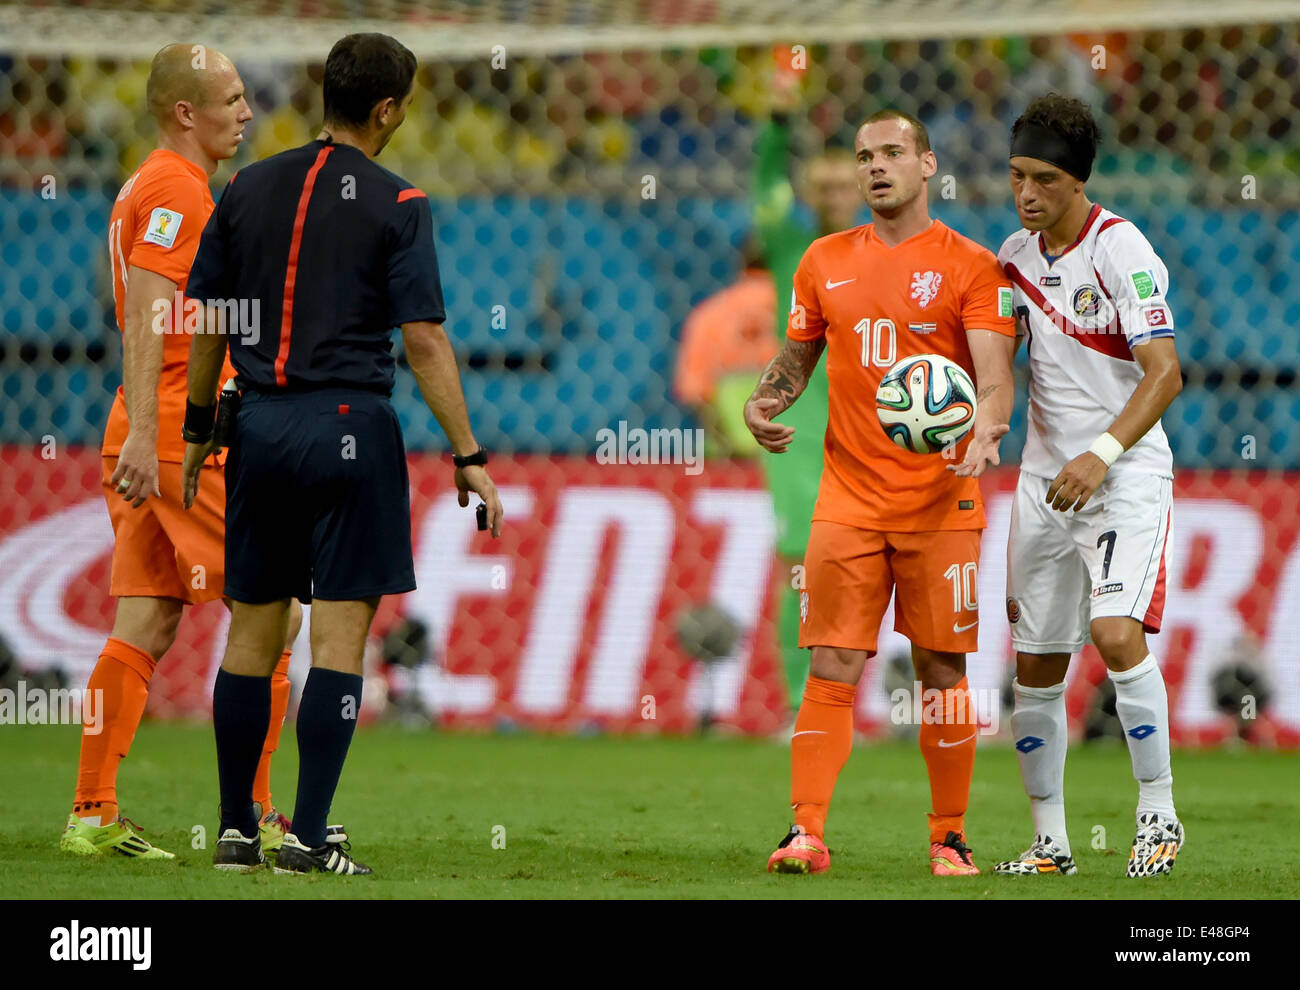 Salvador, Brazil. 5th July, 2014. Netherlands' Wesley Sneijder (2nd R) argues with referee Ravshan Irmatov during a quarter-finals match between Netherlands and Costa Rica of 2014 FIFA World Cup at the Arena Fonte Nova Stadium in Salvador, Brazil, on July 5, 2014. Credit:  Guo Yong/Xinhua/Alamy Live News Stock Photo